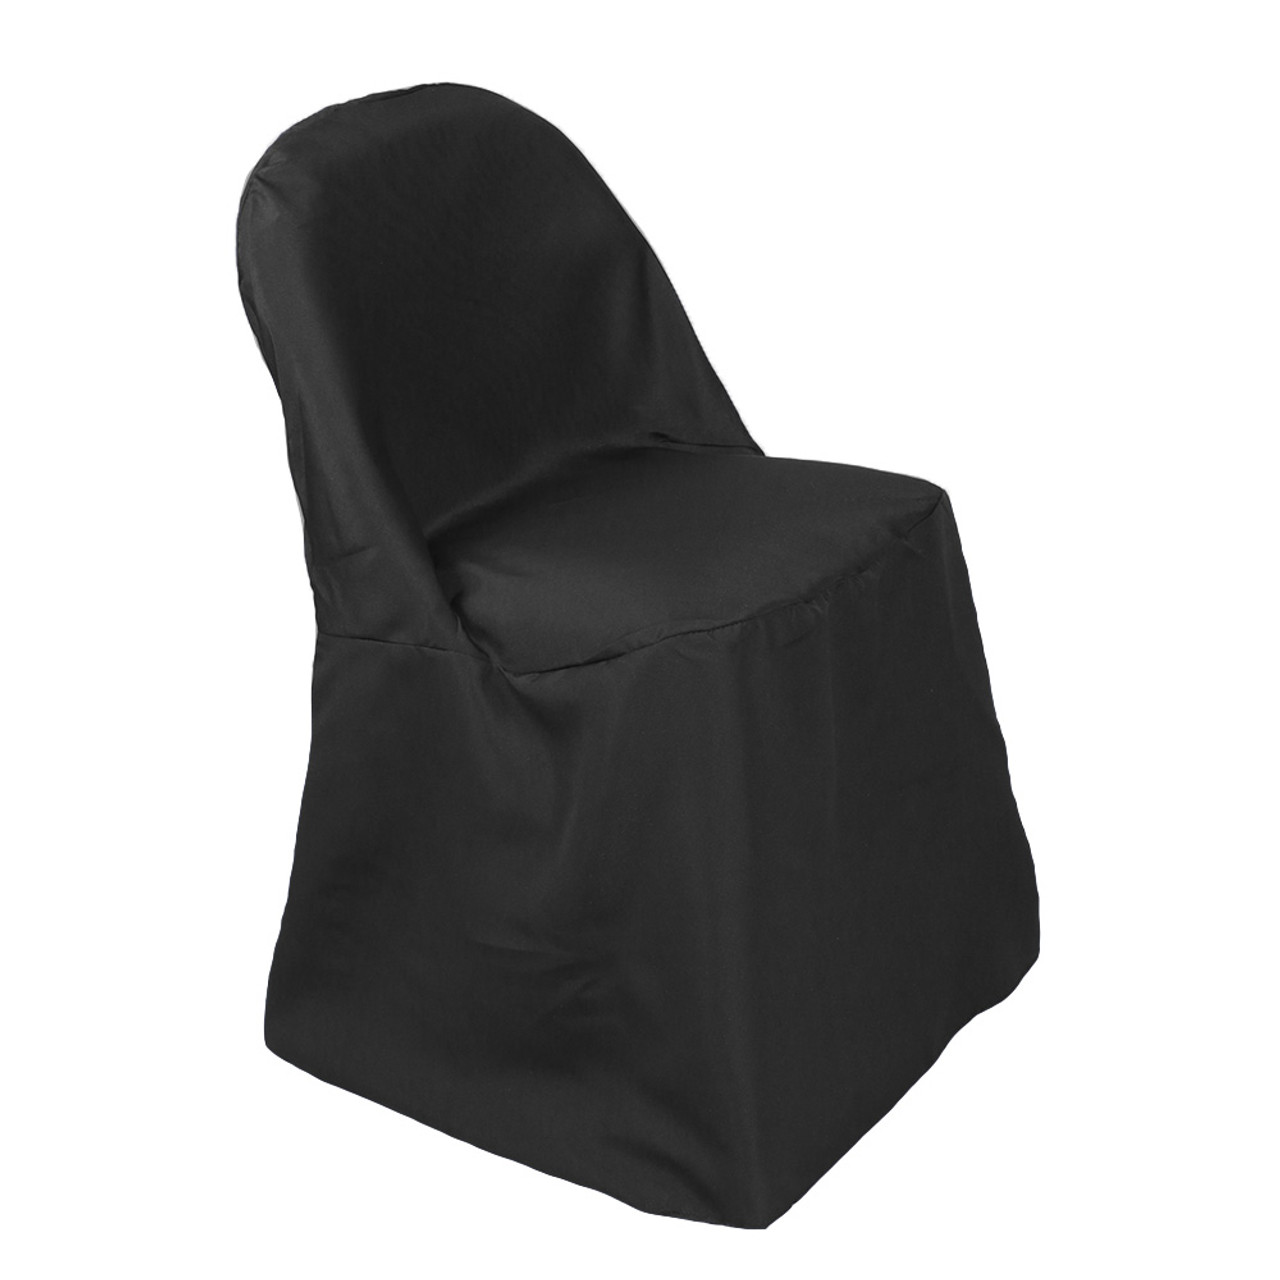 Polyester Folding Chair Cover Black Default  60609.1606756161 ?c=2